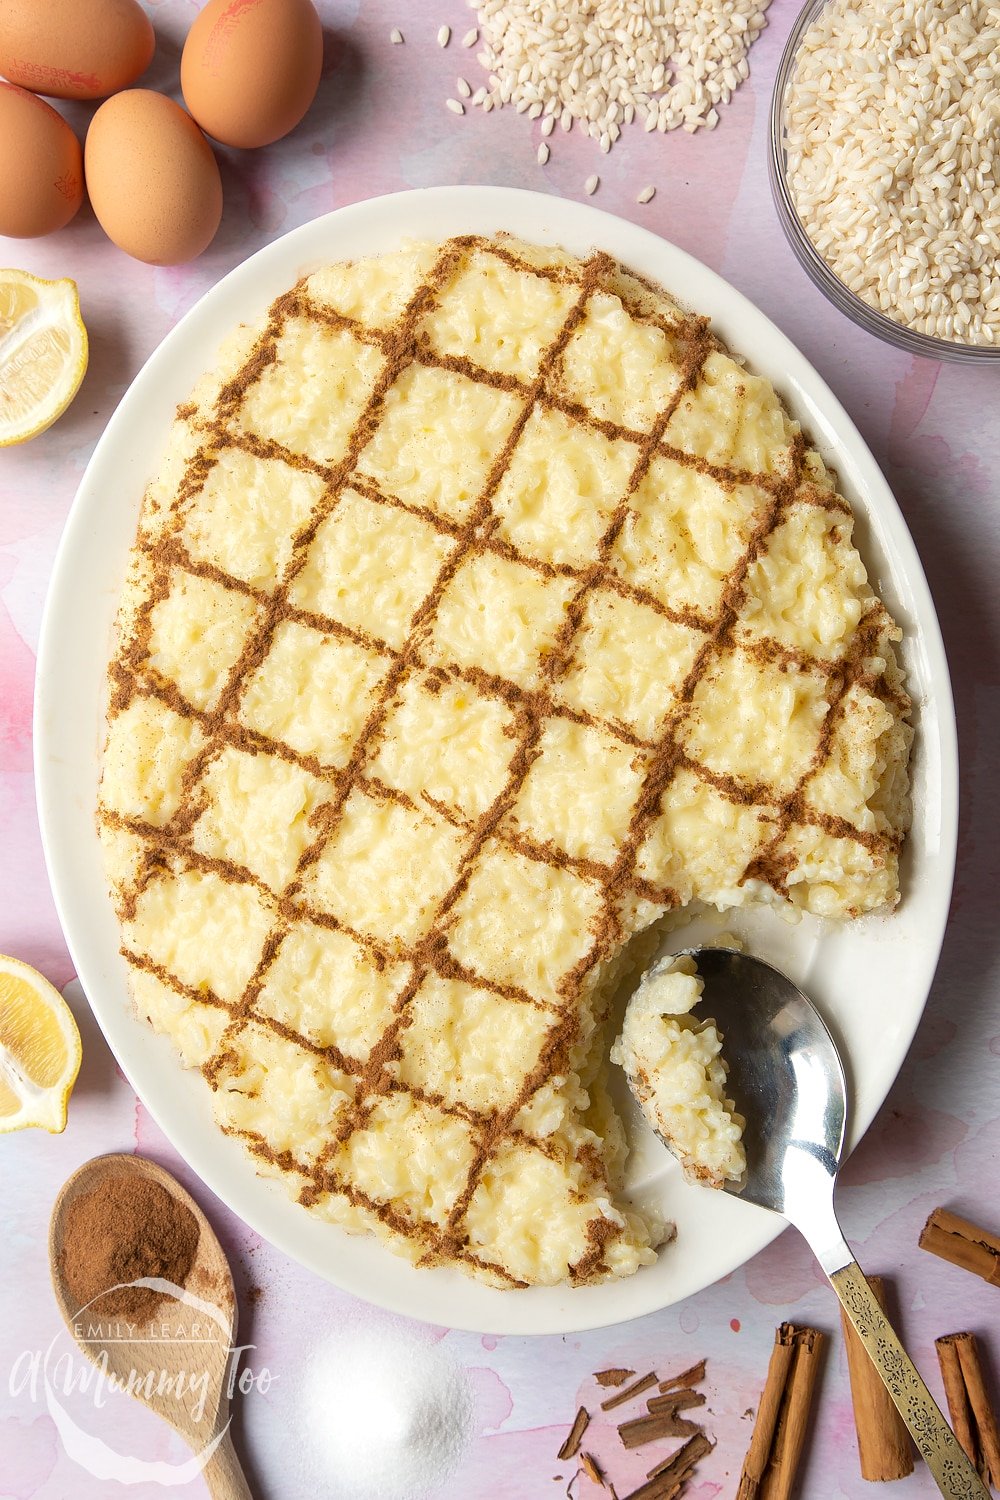 Arroz Doce (Portuguese rice pudding) on a large, white, oval-shaped plate. The rice pudding is decorated with ground cinnamon in a crosshatch pattern. A spoon rests on the plate where some of the pudding has been taken away.